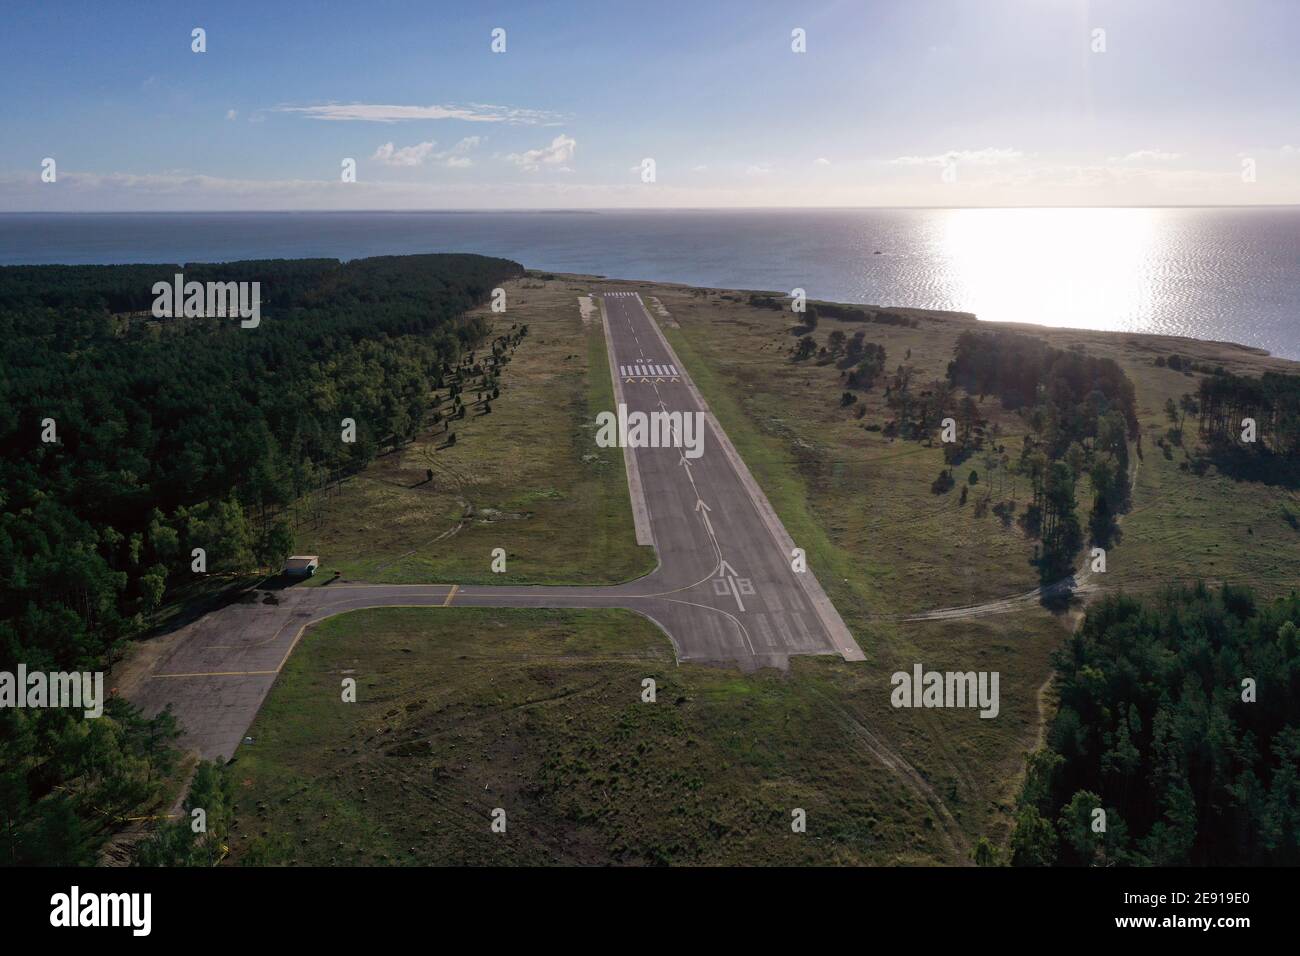 Small epmty airfield airport near sea in resort, aerial Stock Photo